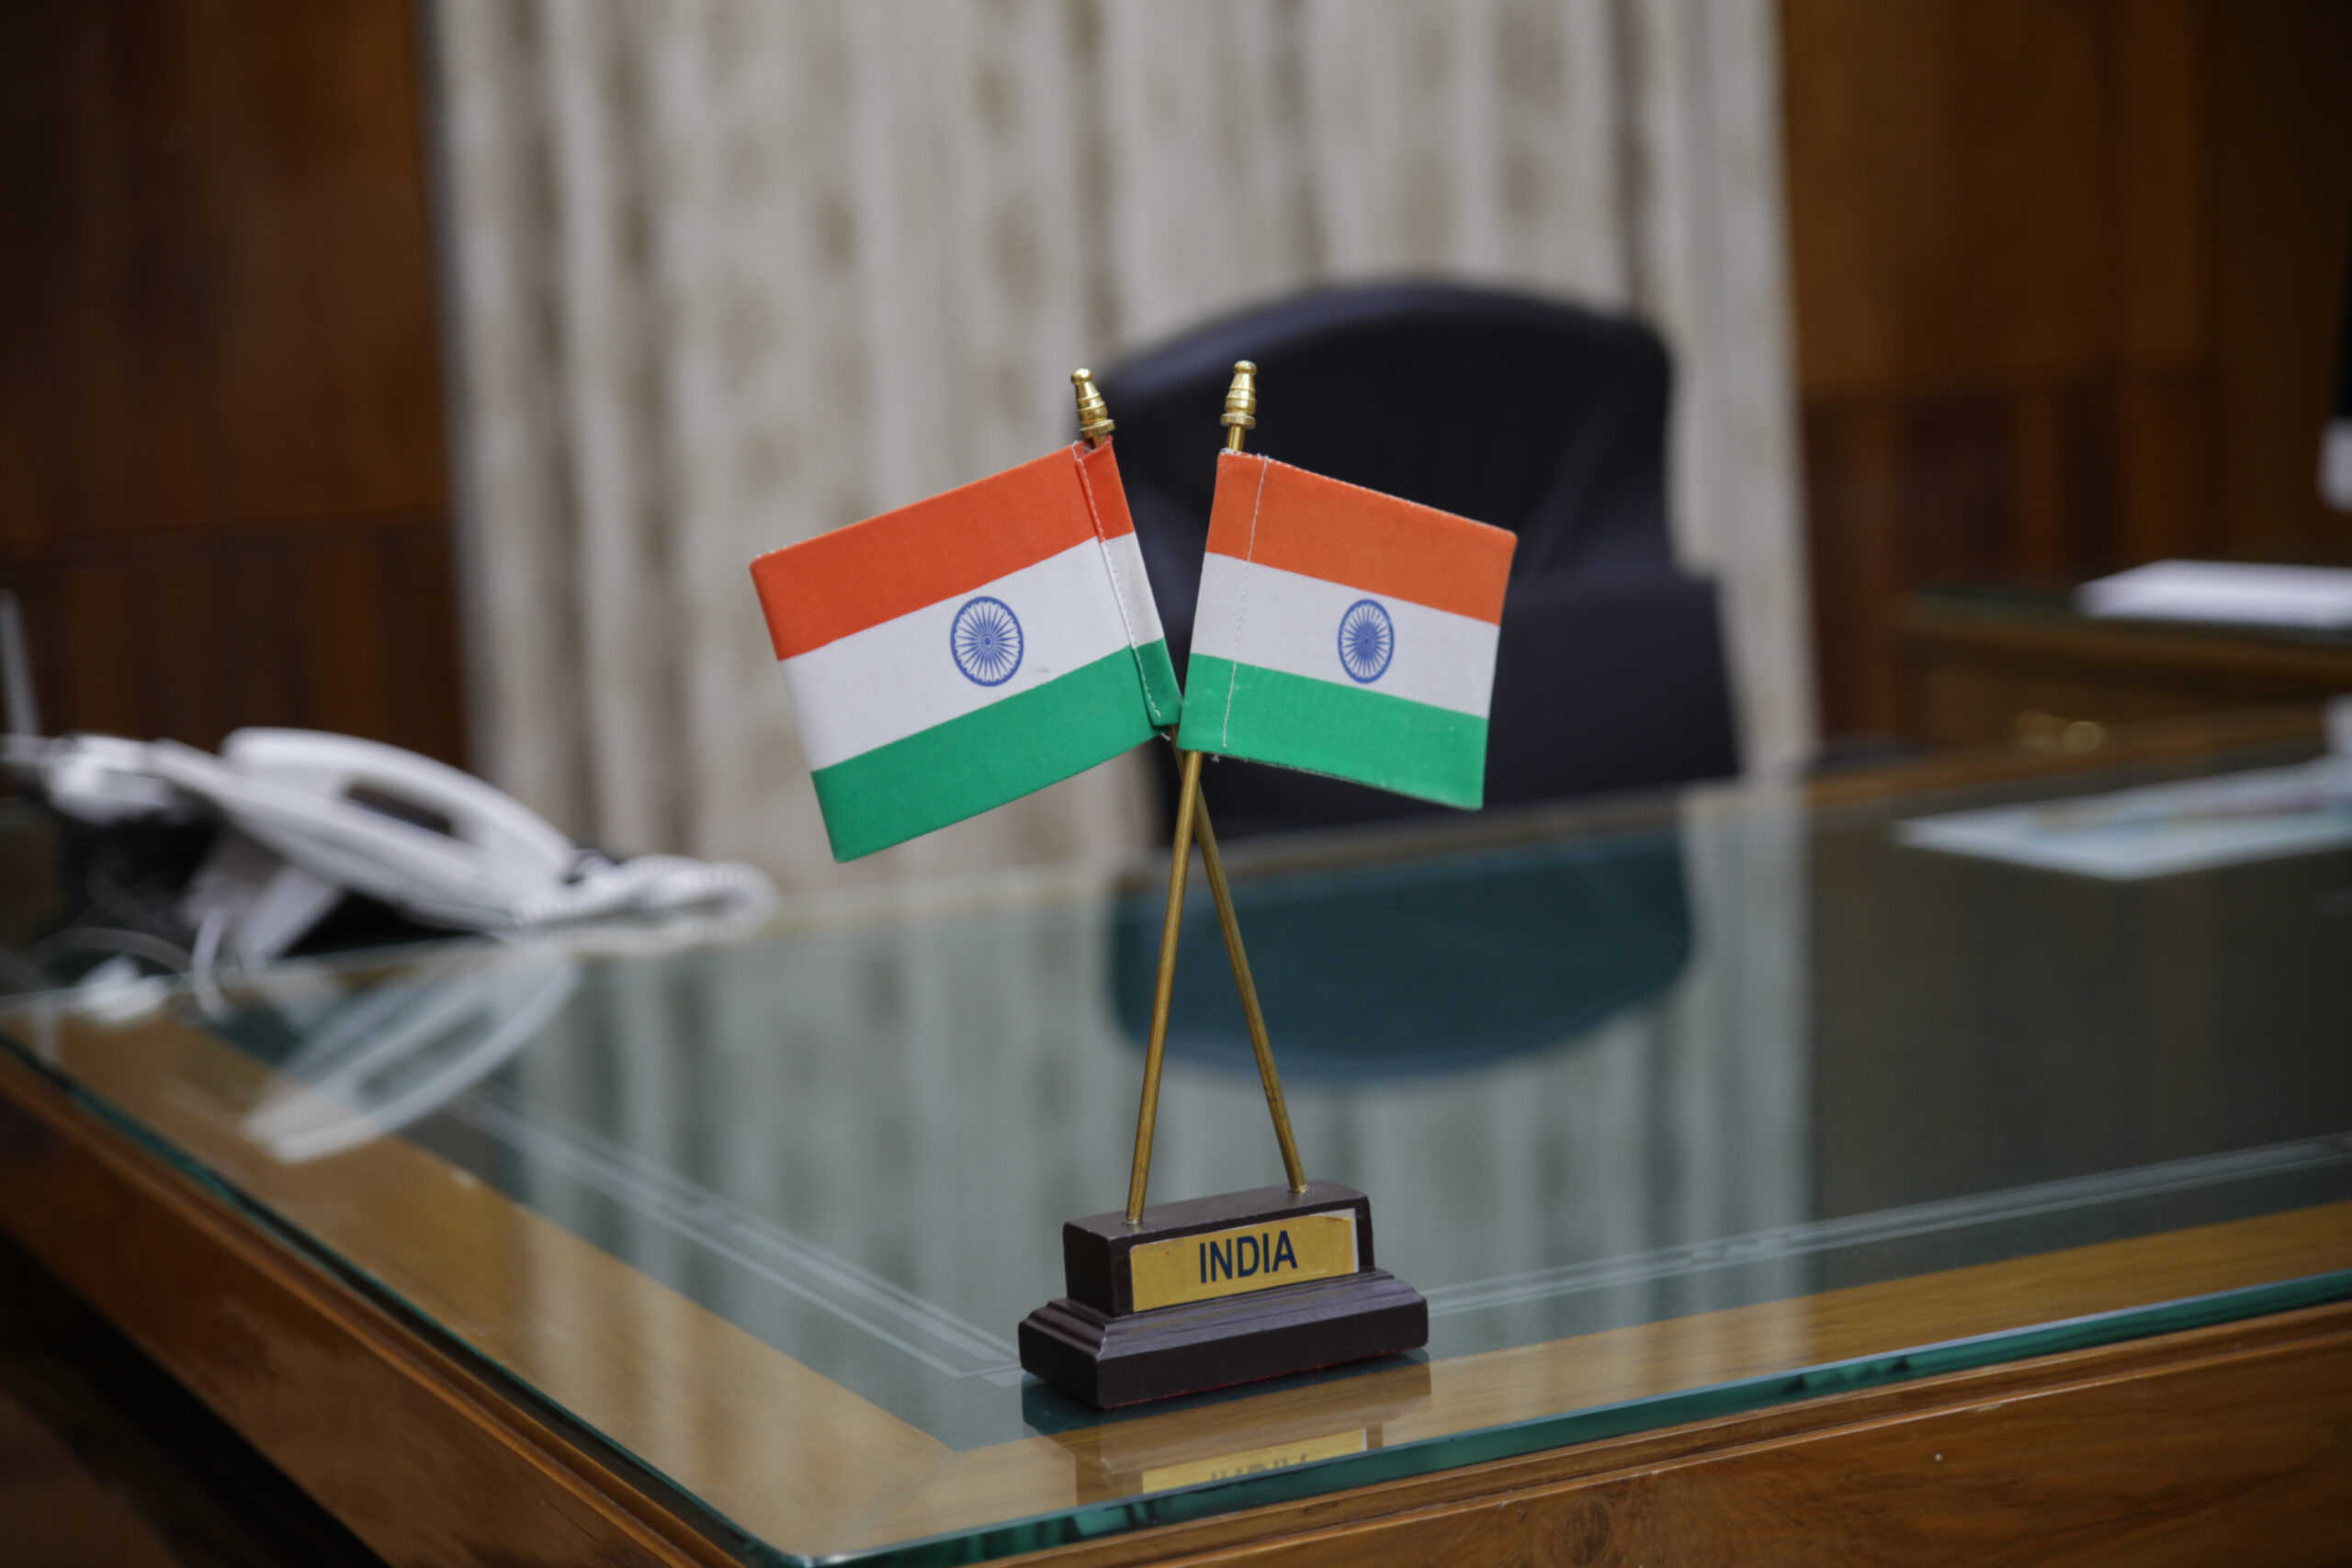 Indian,Tricolor,Flag,Placed,On,The,Executive,Table,Of,A